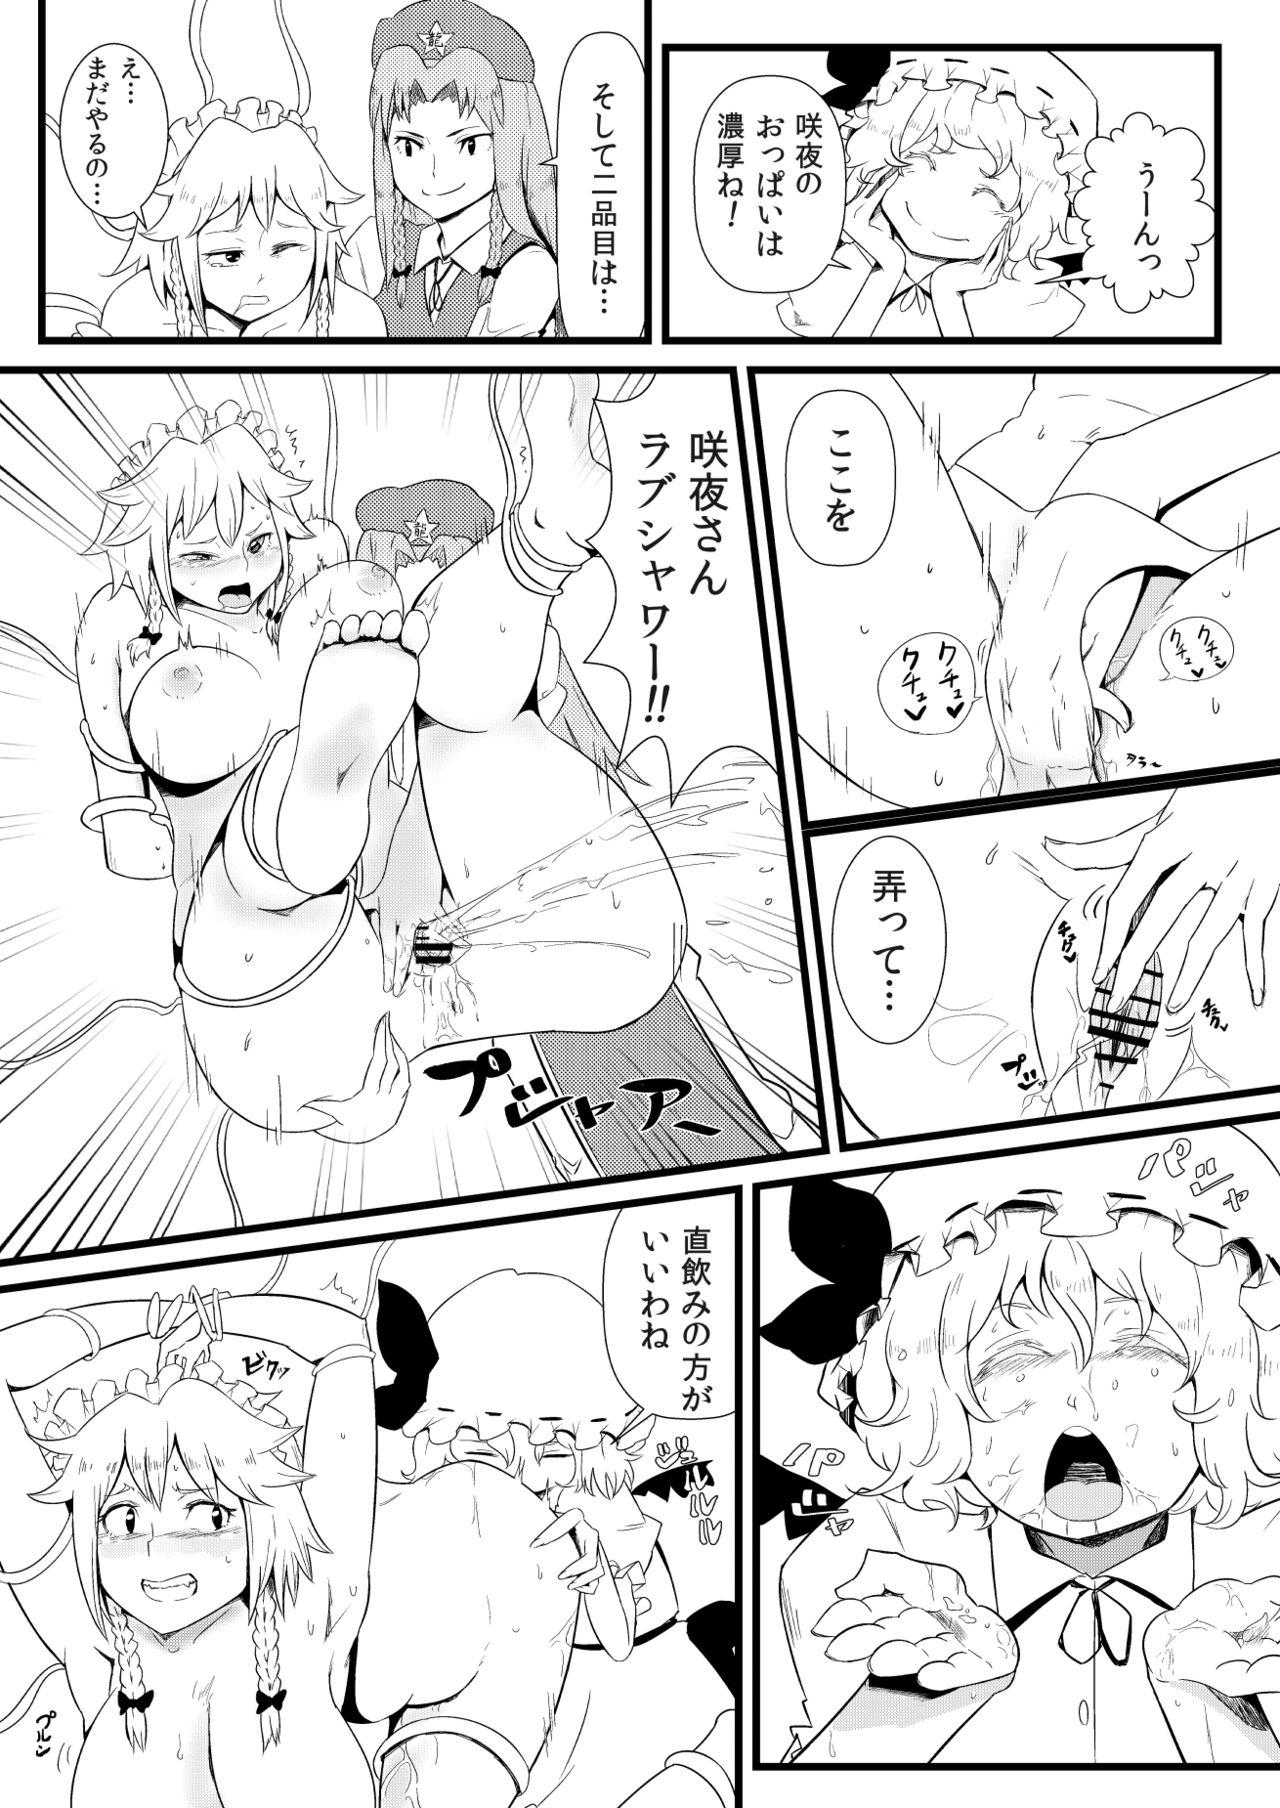 Deflowered 東方板としあき合同誌5 - Touhou project Lesbian - Page 7